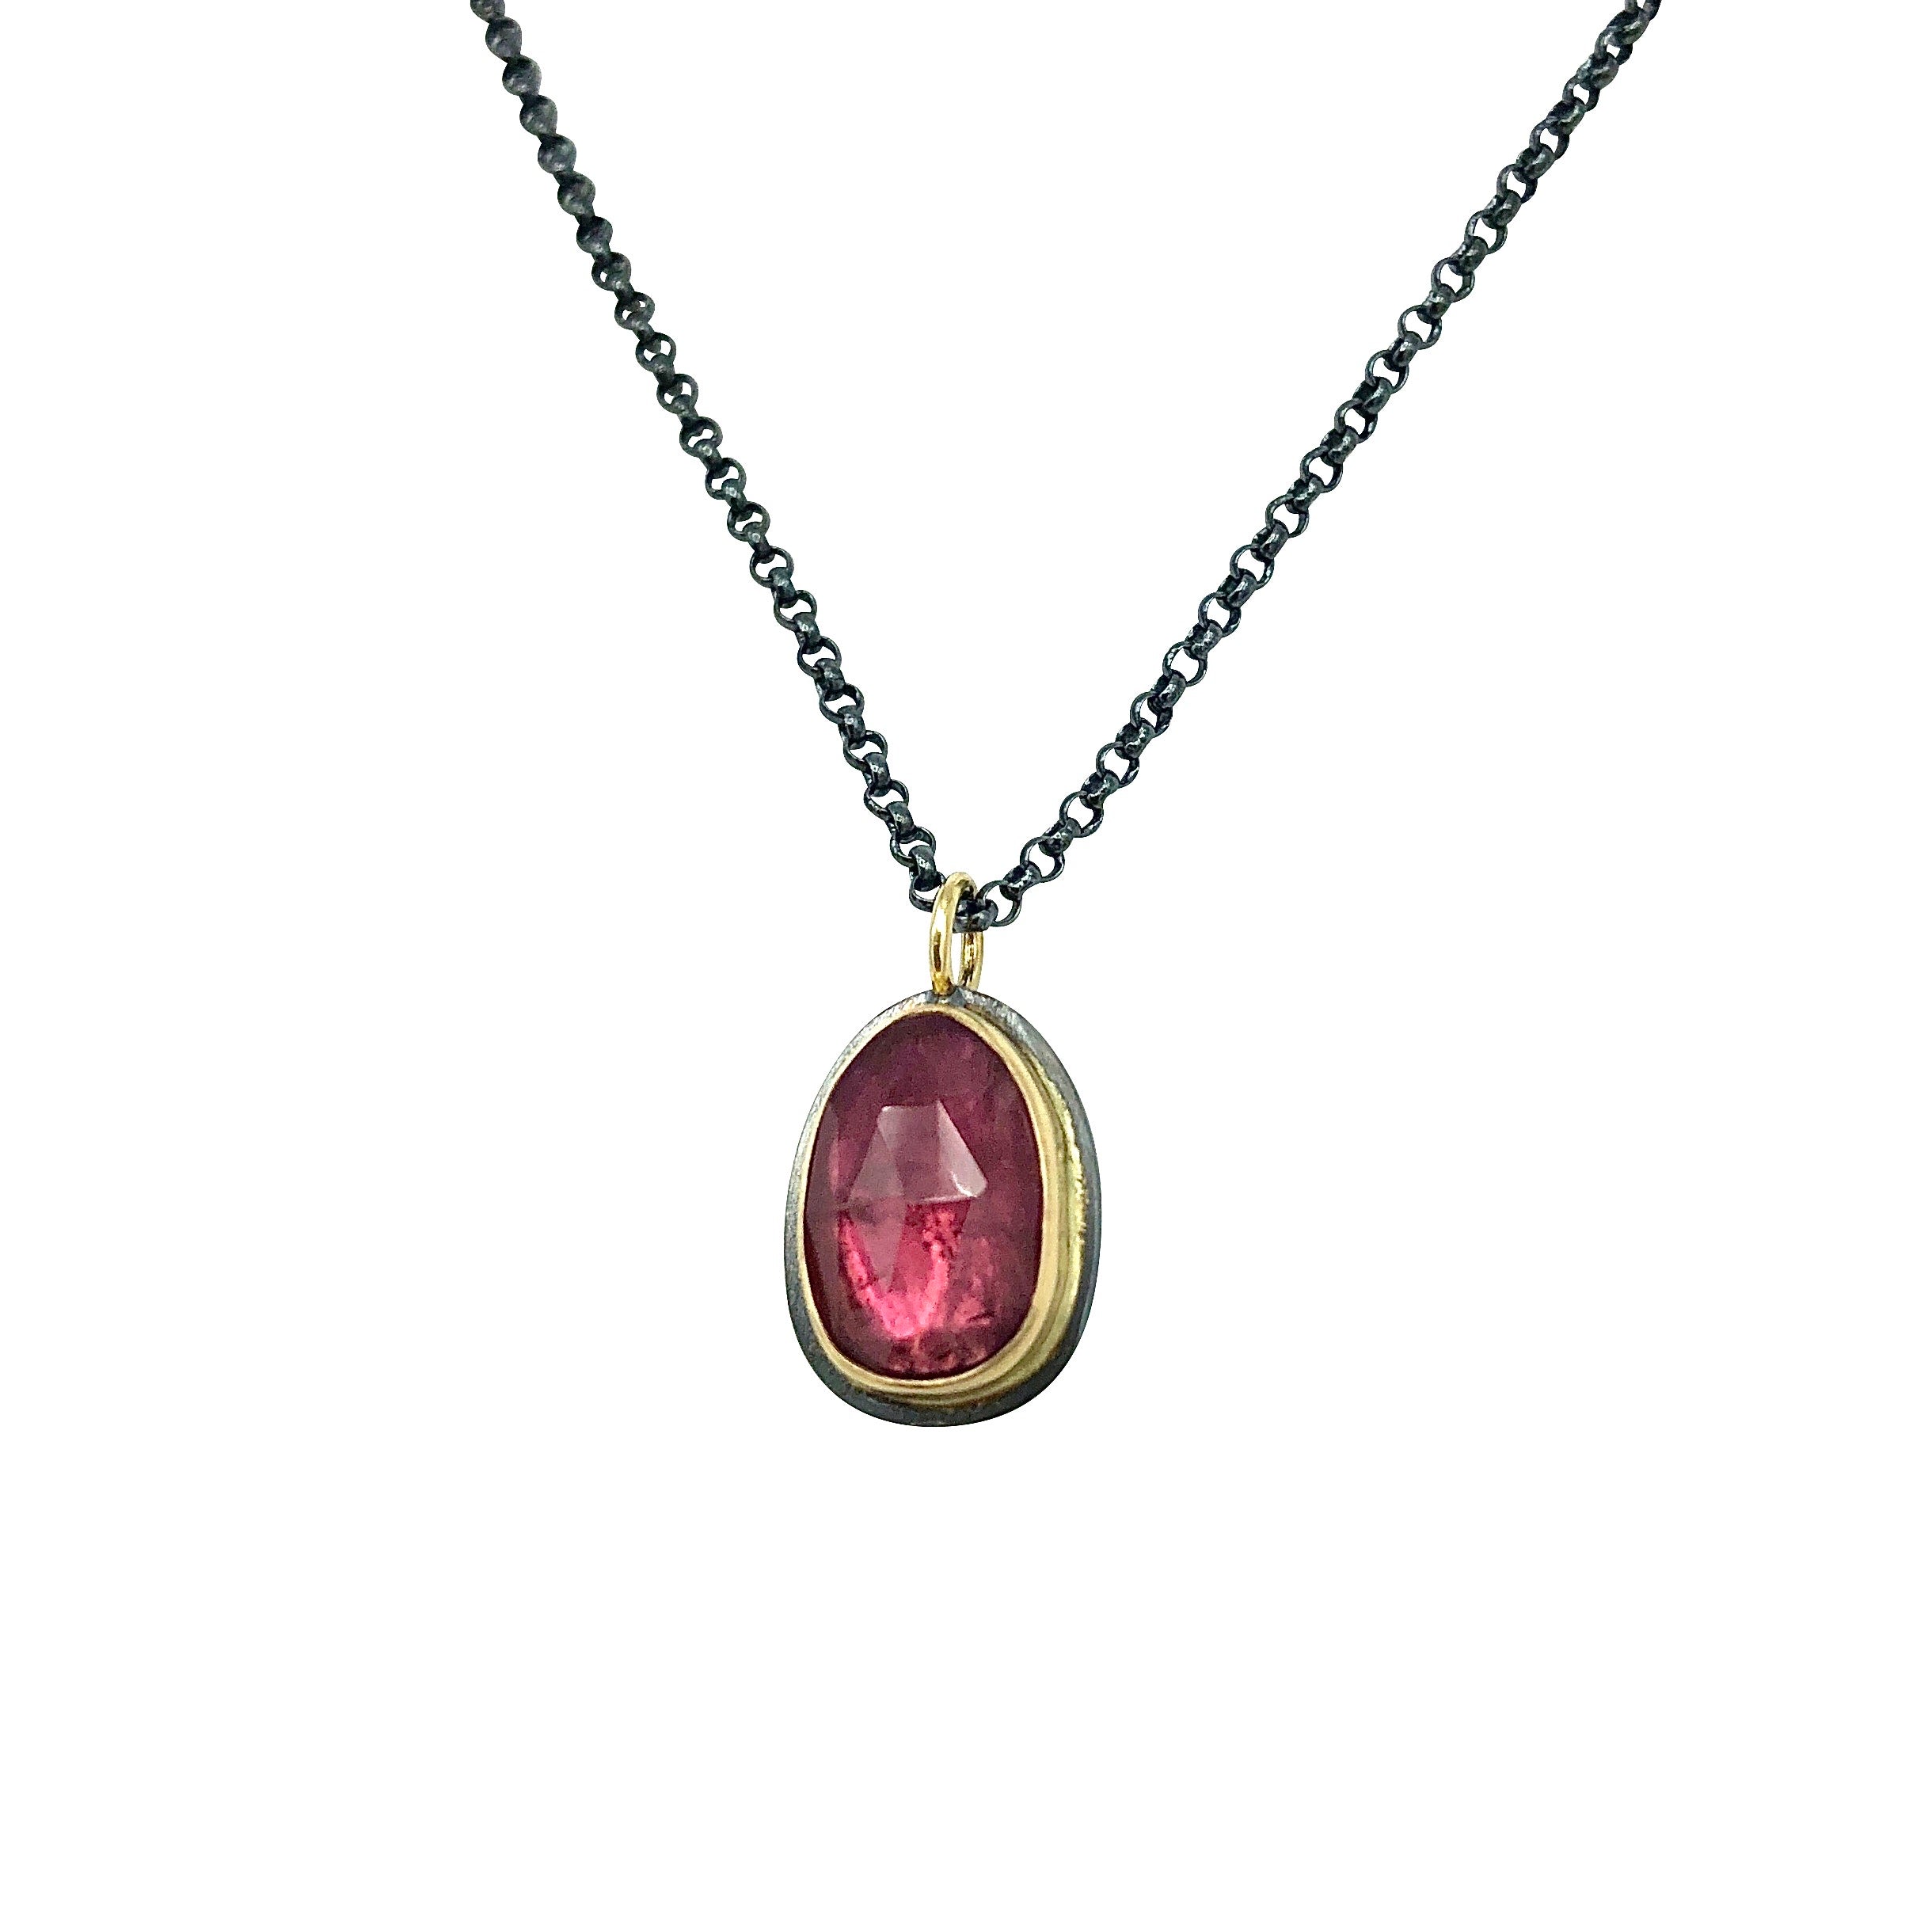 Pink Rose Cut Tourmaline Necklace set in 18k Gold on Oxidized Sterling Silver Chain